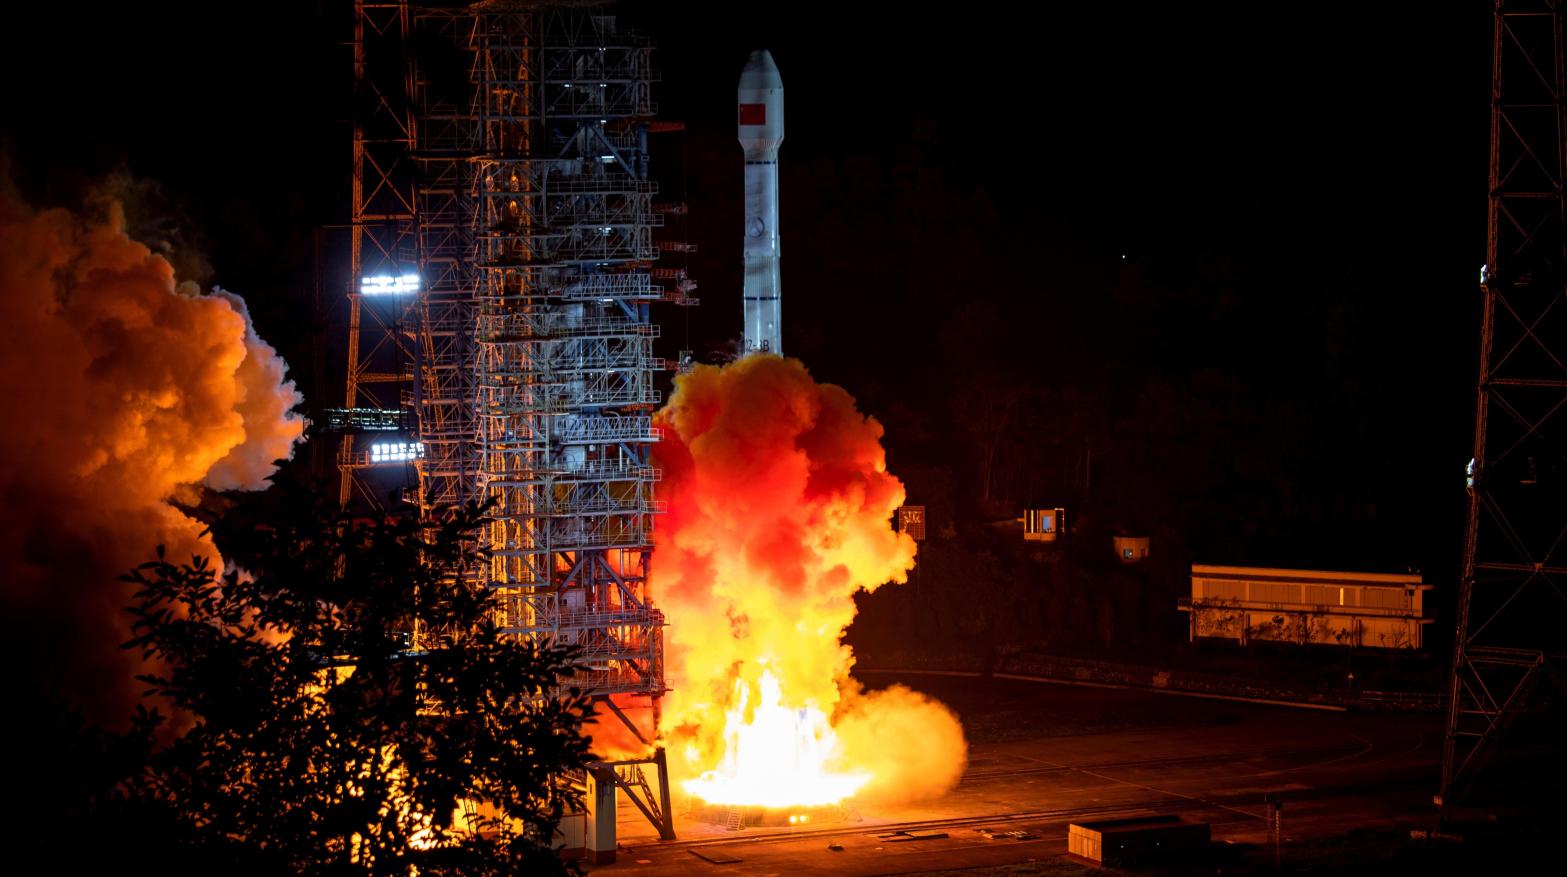 China's Long March-3B rocket launched from the Xichang Satellite Launch Centre in September 2019, carrying two satellites of BeiDou Navigation Satellite System. (Photo: Wang Xin, AP)